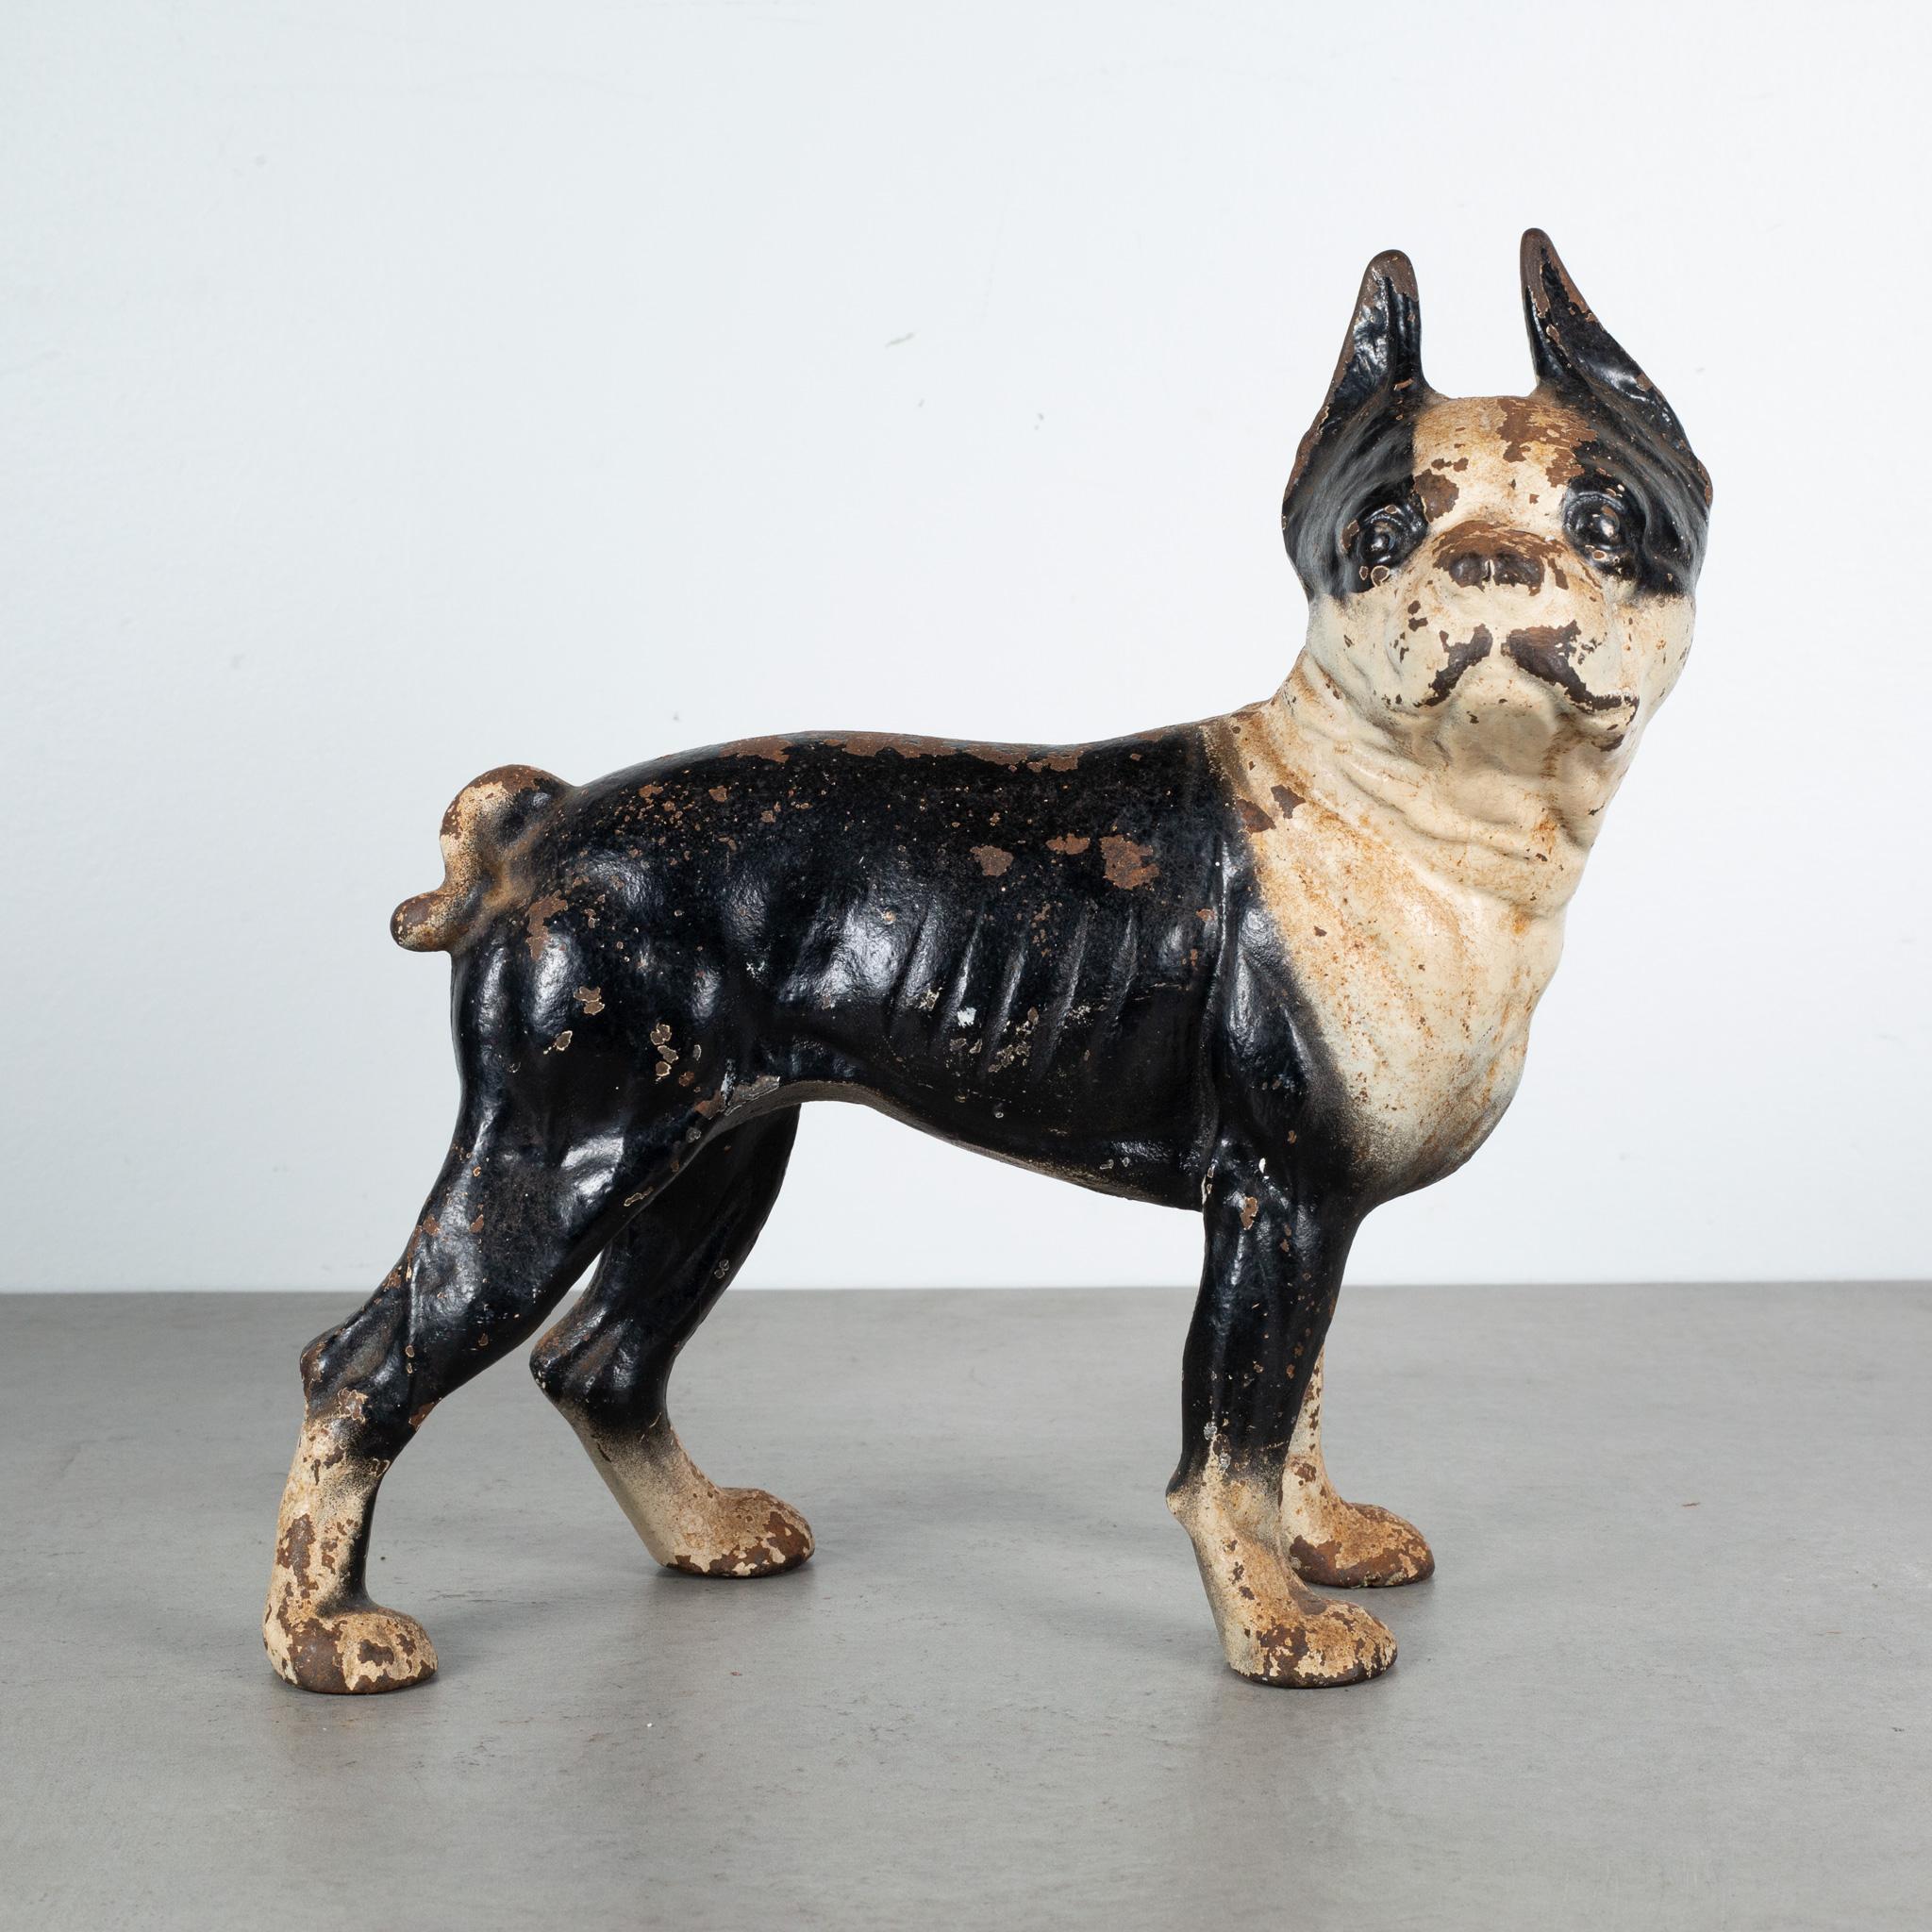 About

This is an original cast iron Boston Terrier doorstop manufactured by the Hubley Manufacturing Company in Lancaster Pennsylvania USA. The piece has retained its original hand painted finish and is in good condition with the appropriate